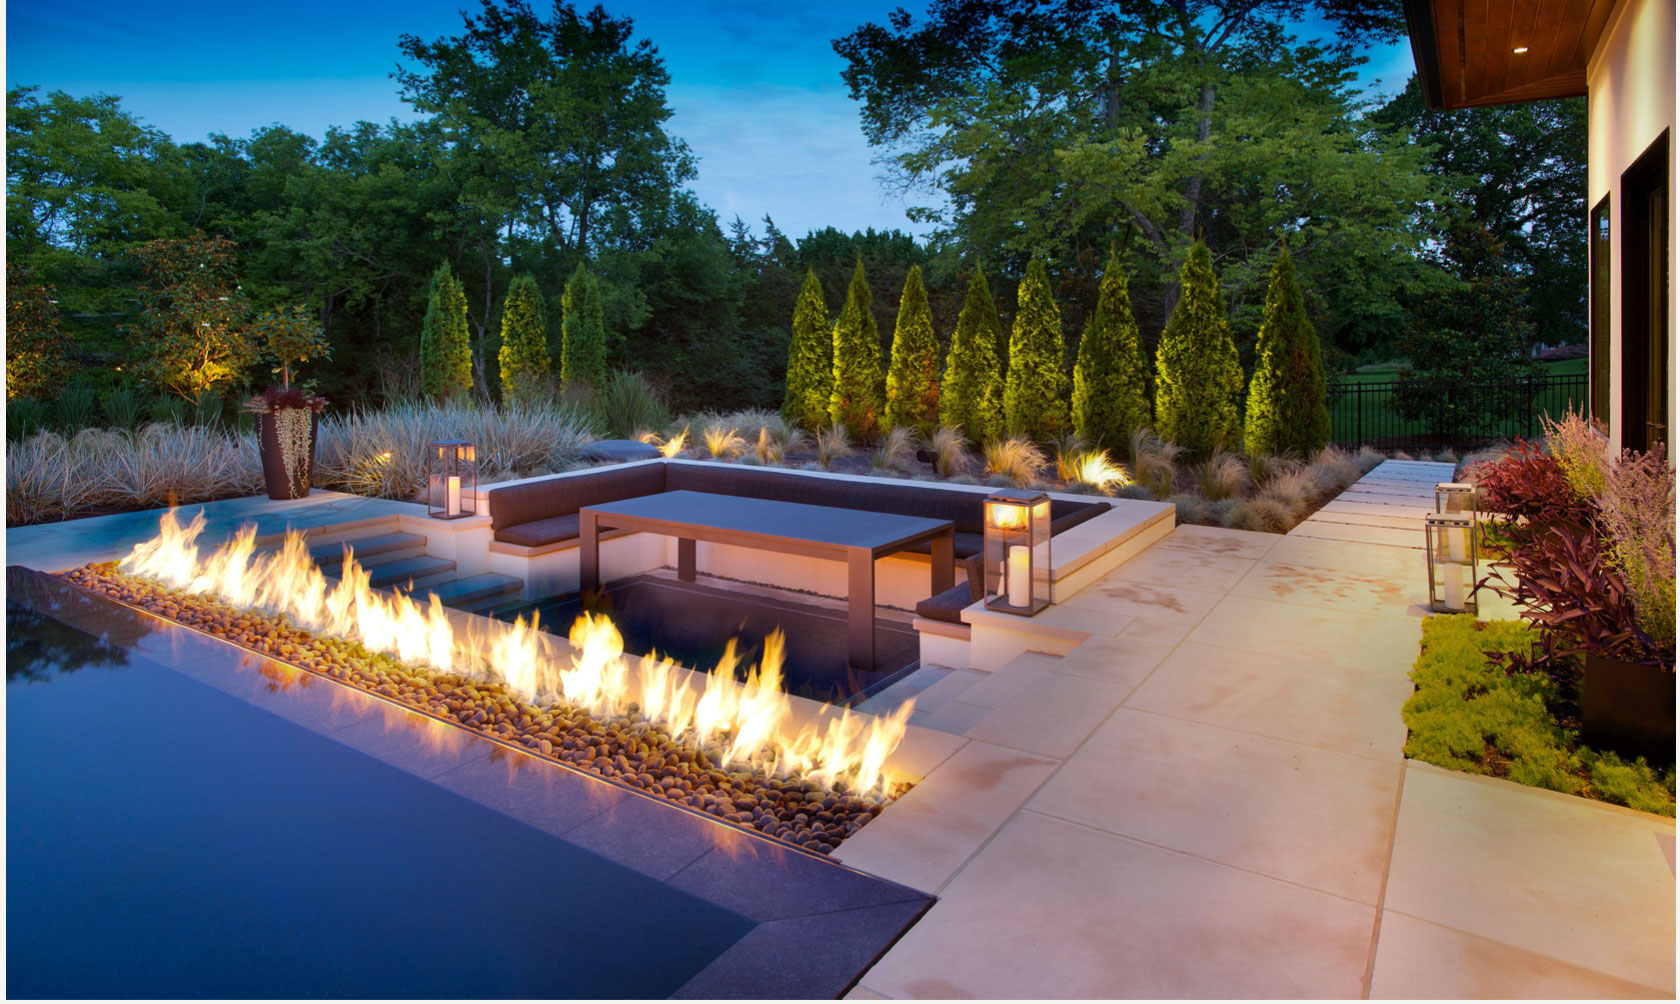 Outdoor space with pool, filter feature and cypress trees